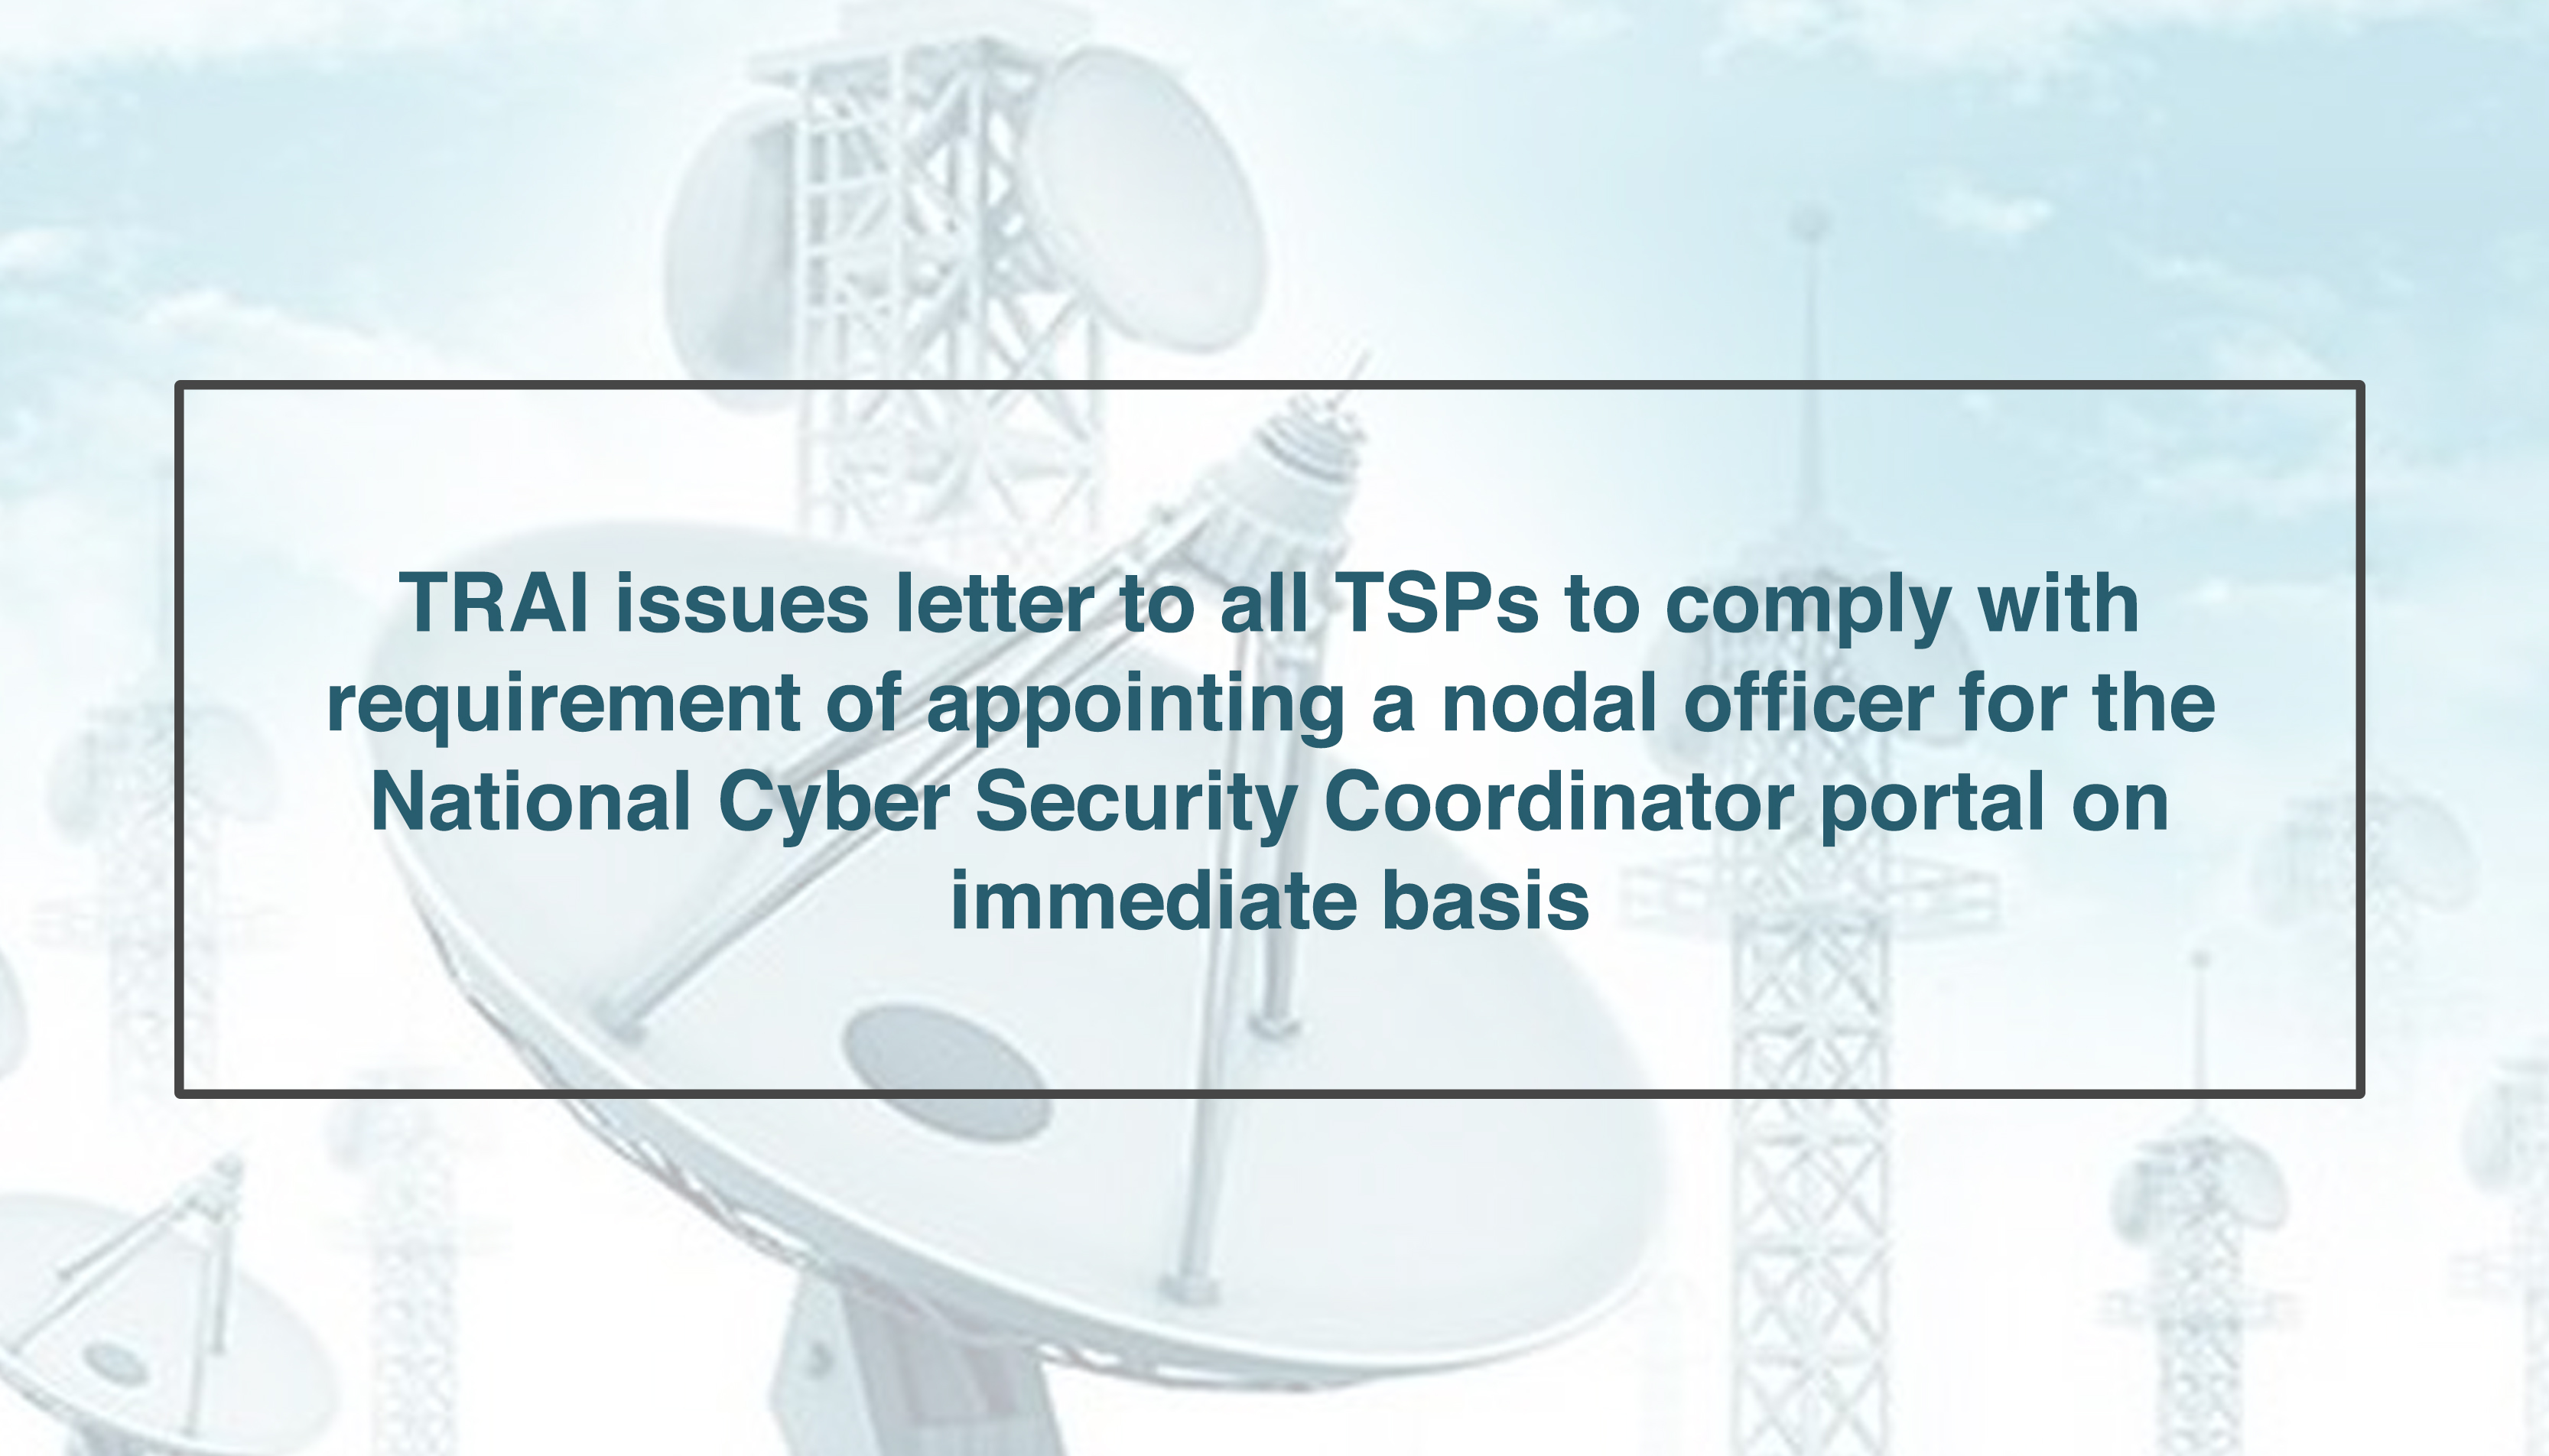 TRAI issues letter to all TSPs to comply with requirement of appointing a nodal officer for the National Cyber Security Coordinator portal on immediate basis